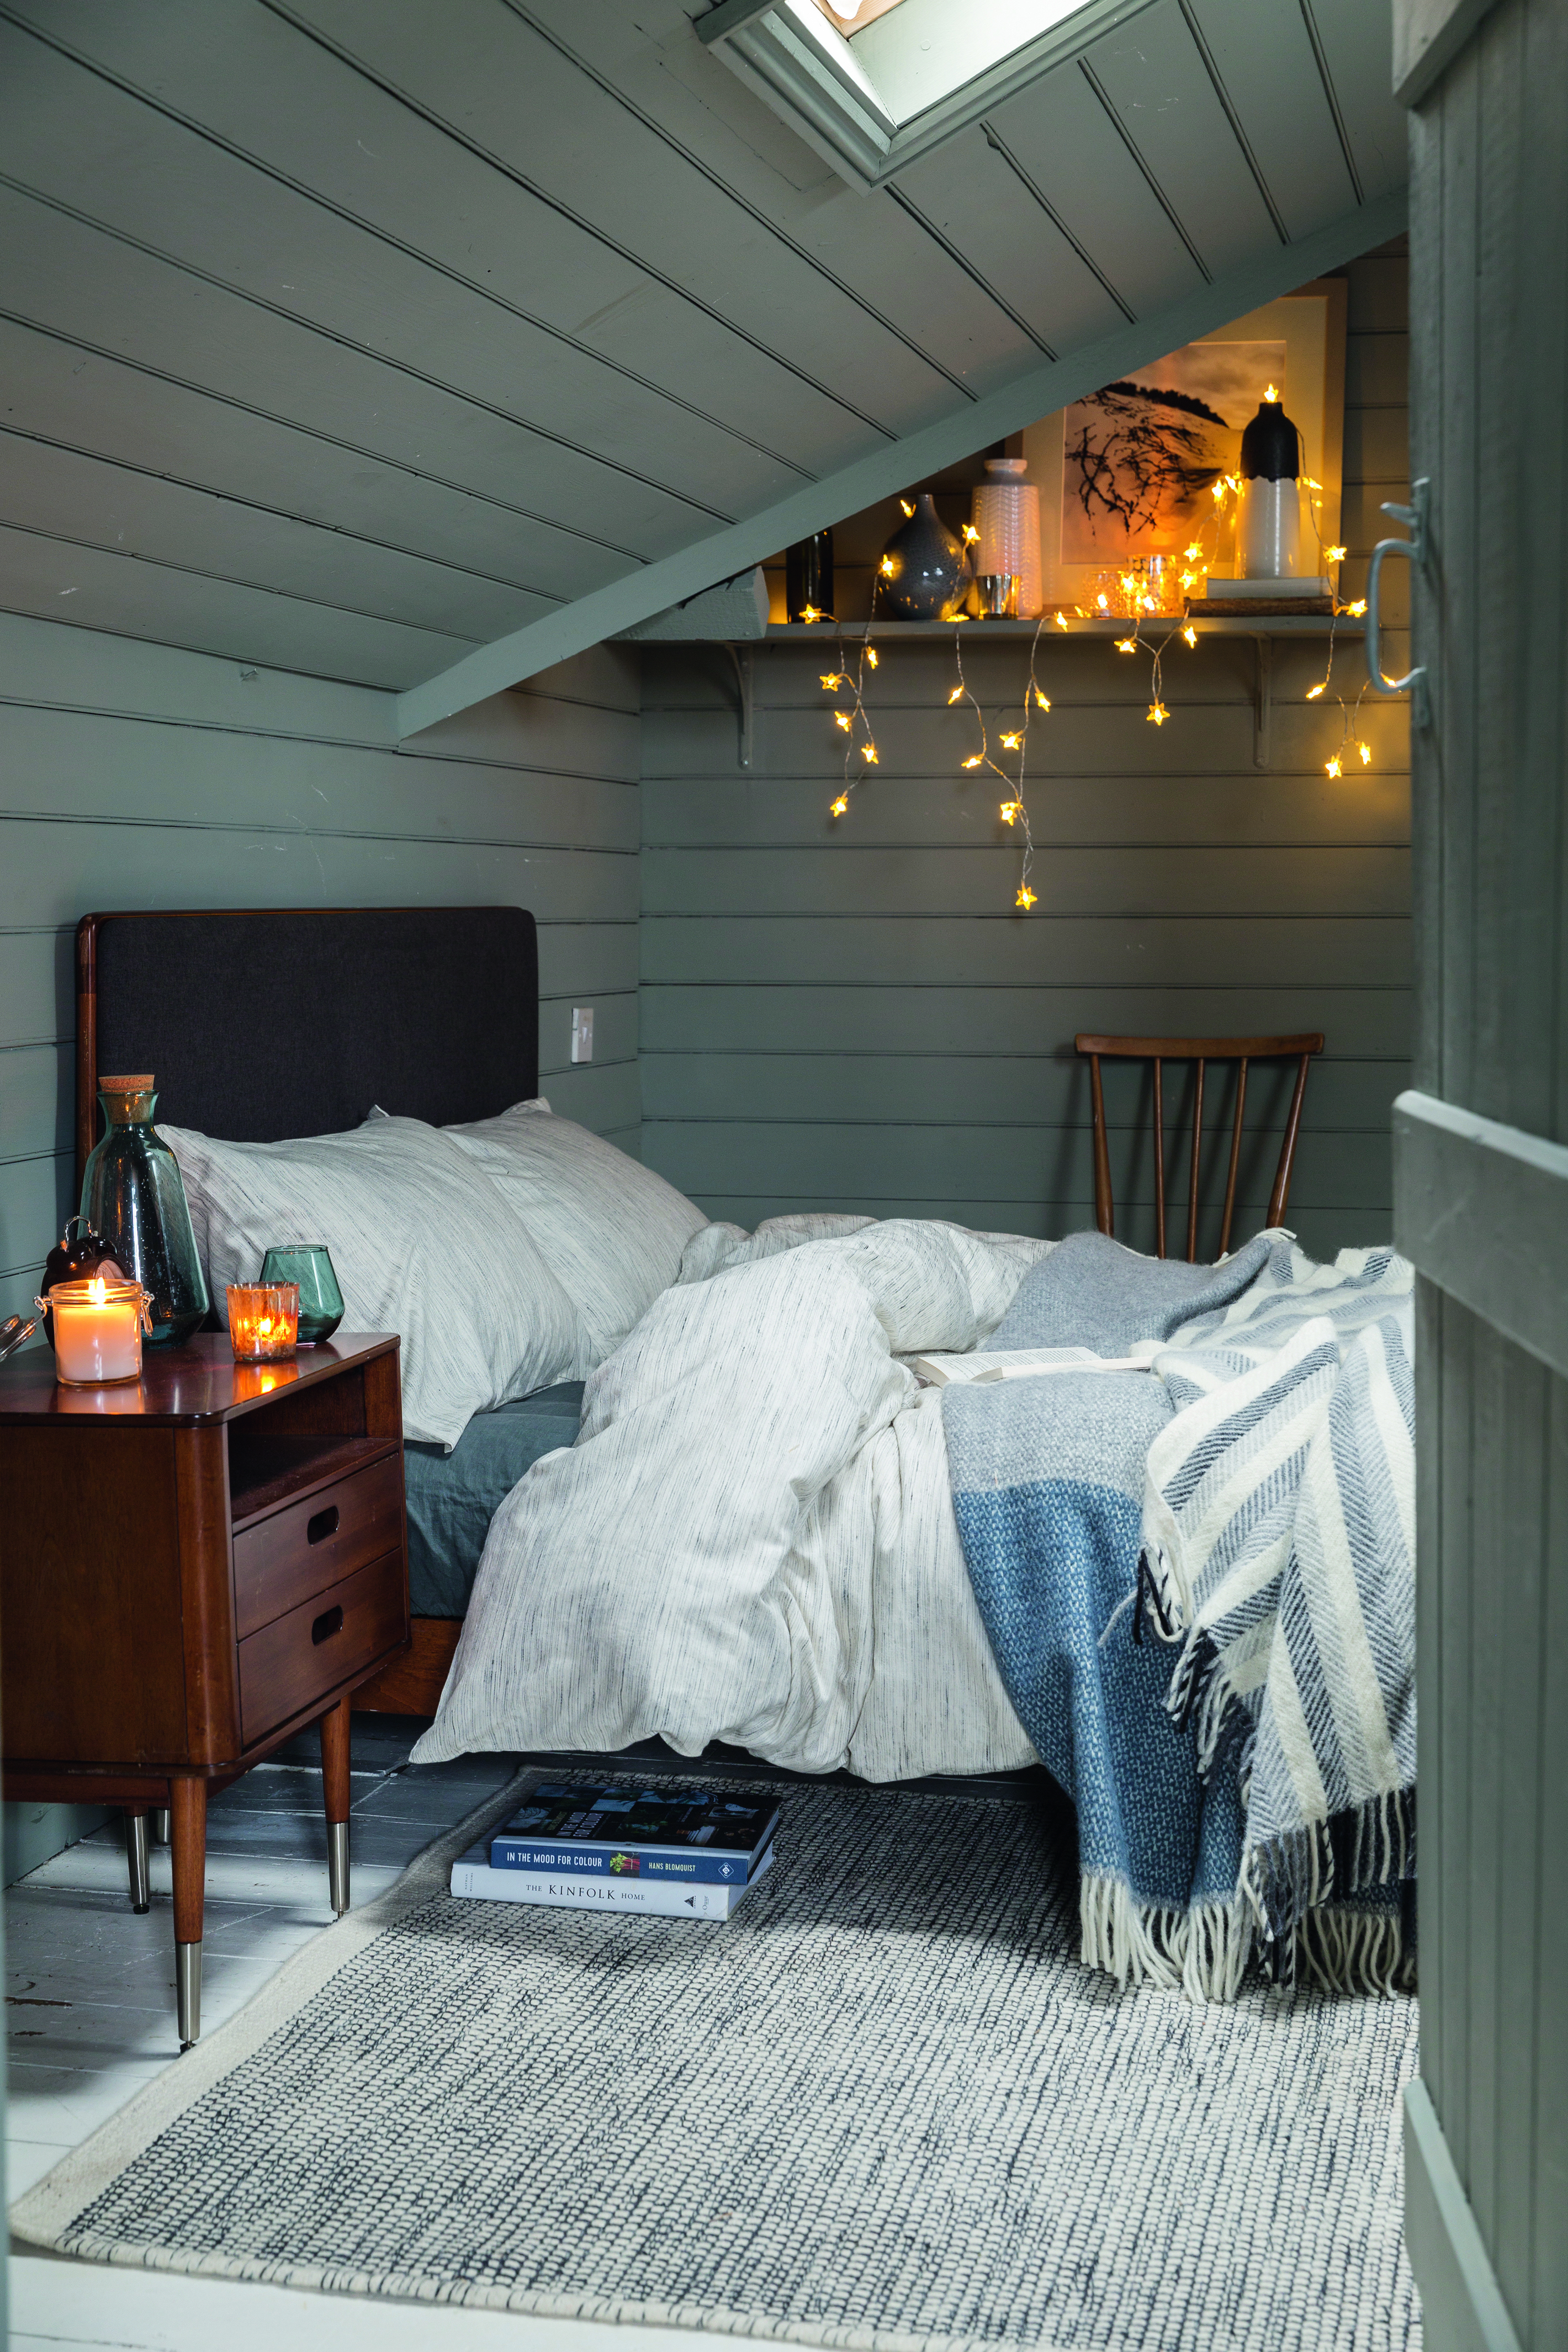 A Scandinavian style bedroom by Soak & Sleep with wall paneling and fairy lights